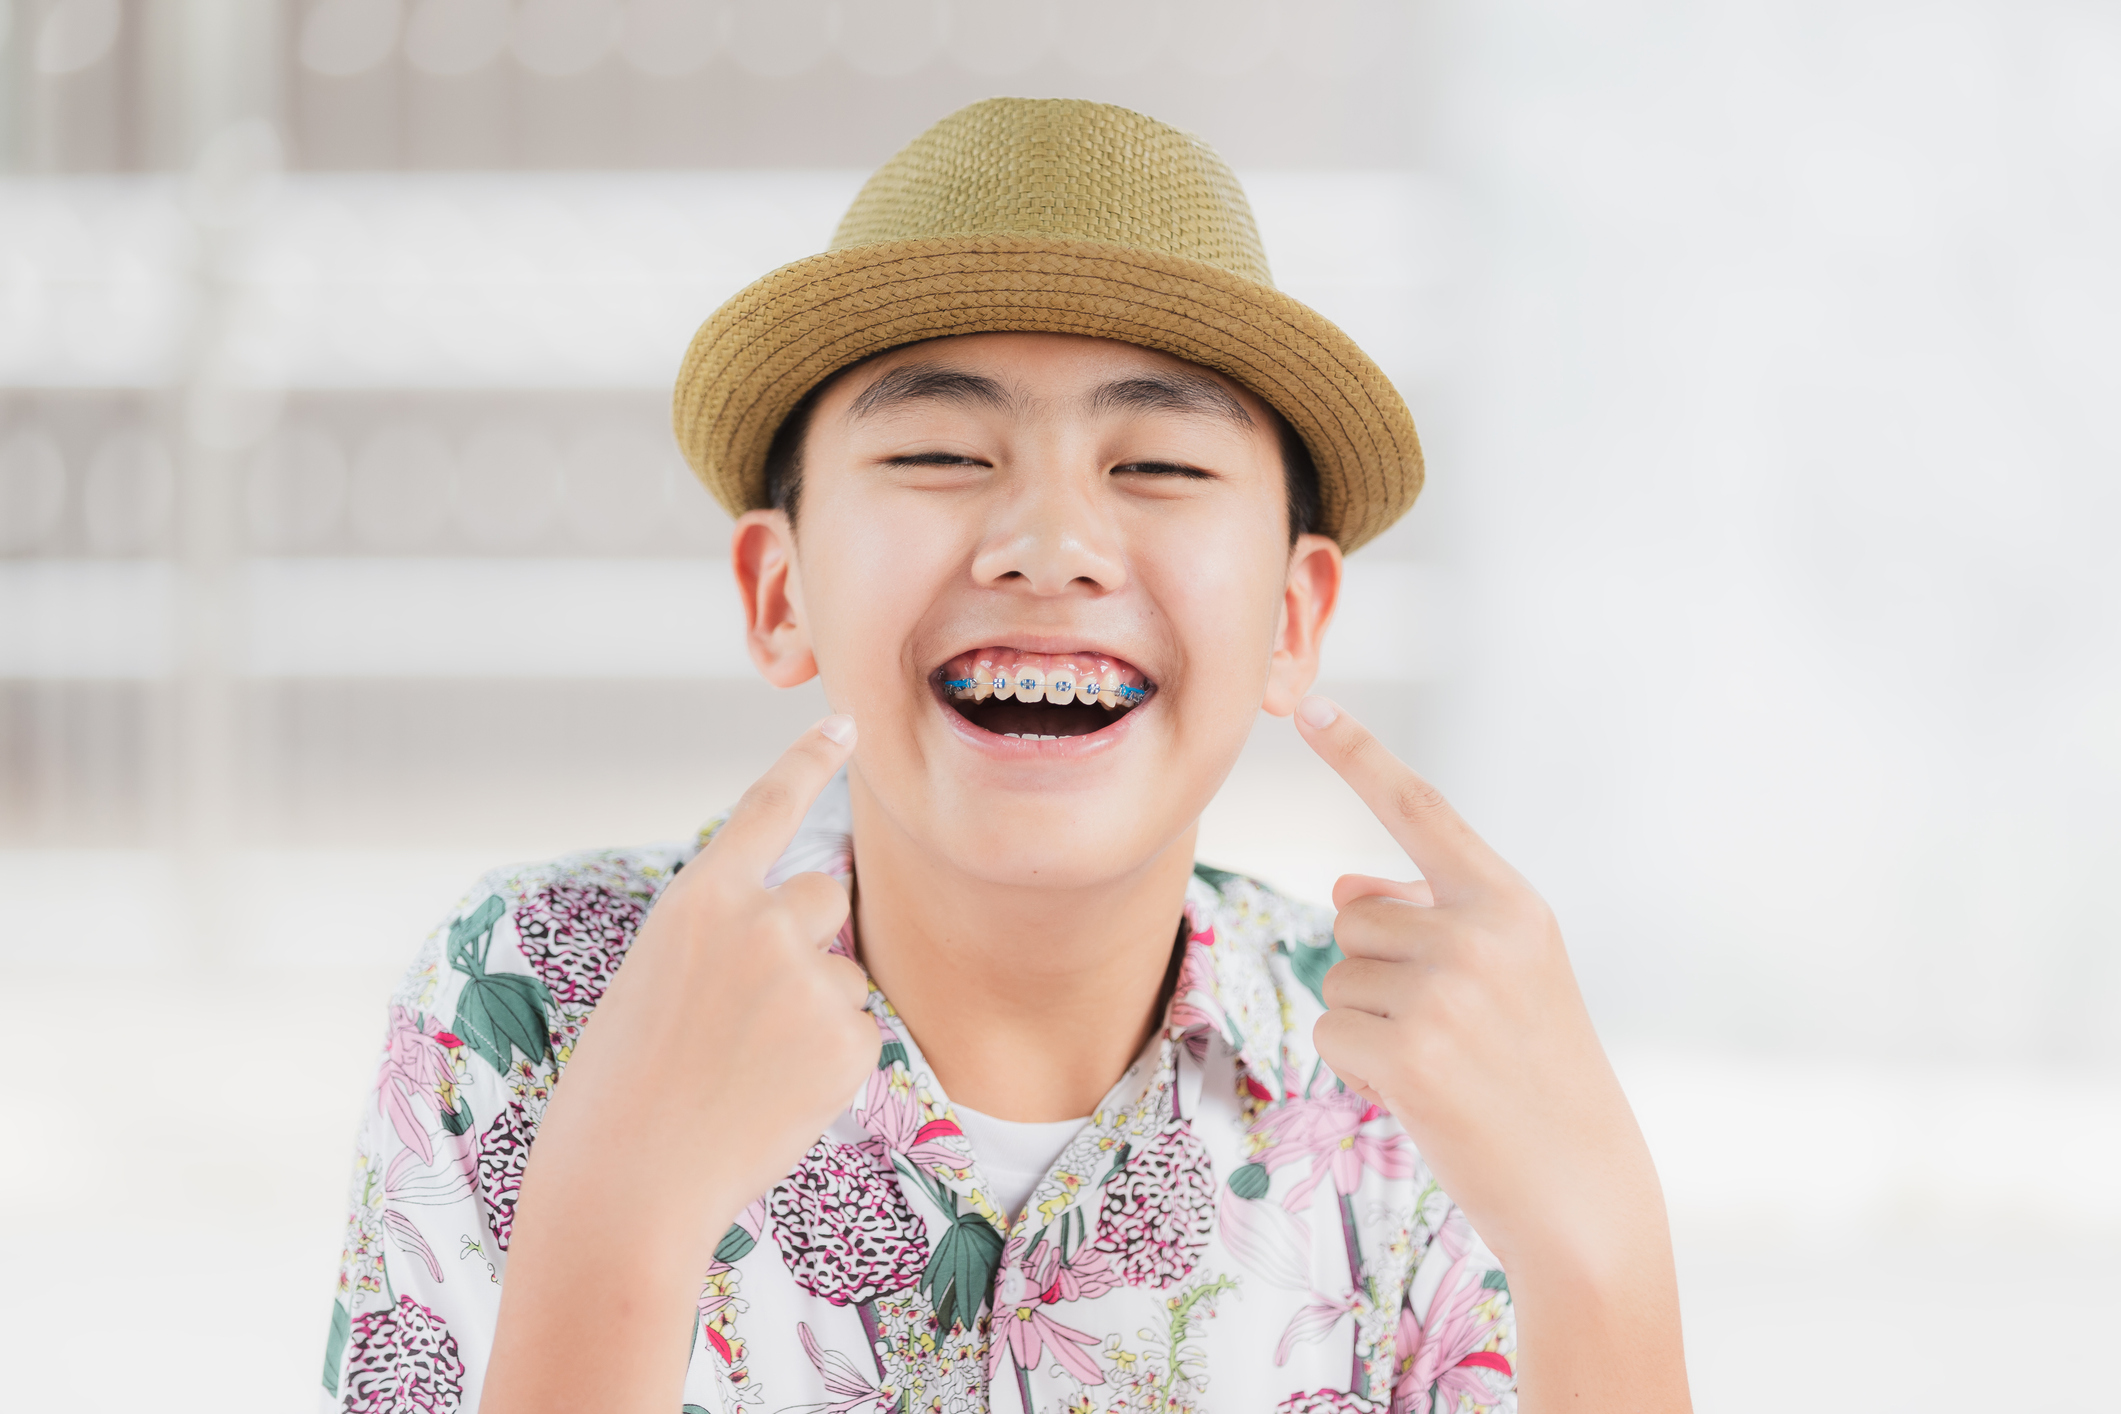 Young boy wearing a hat smiling pointing at his teeth which have braces.